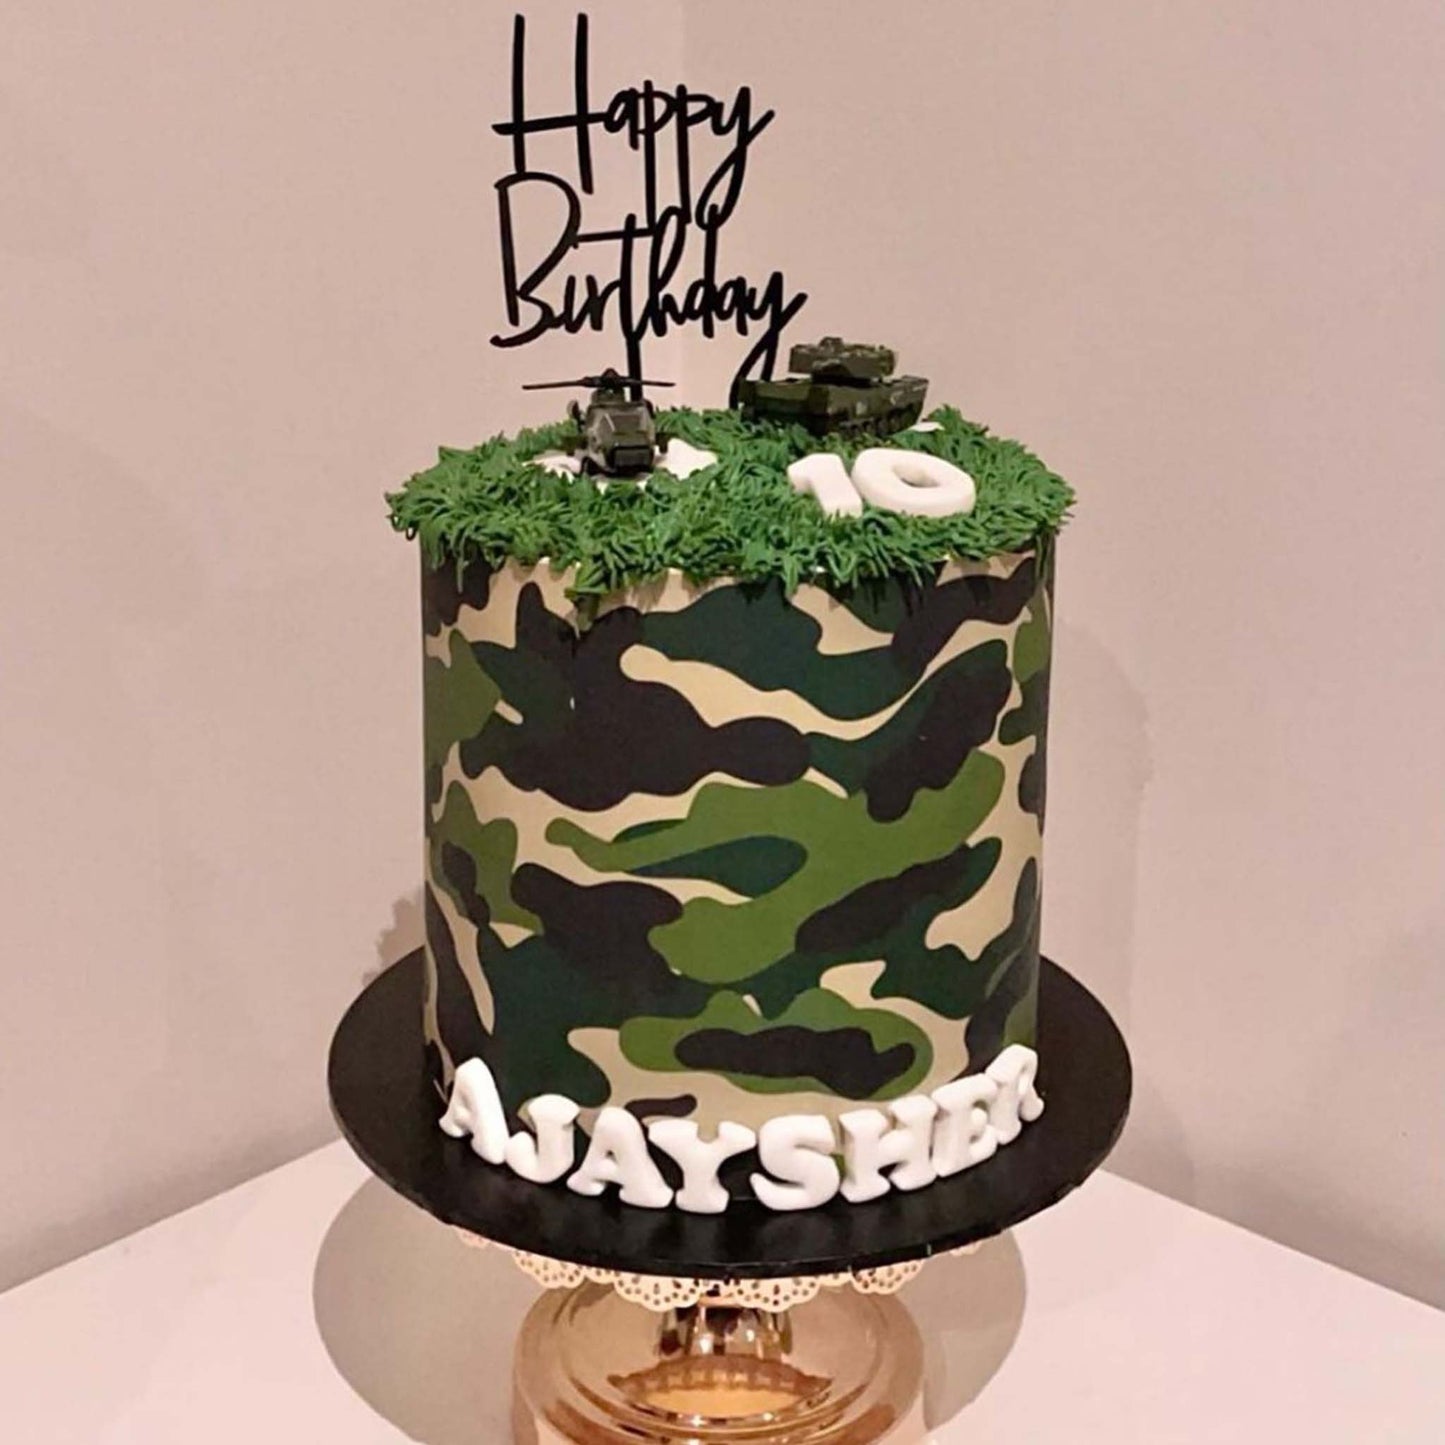 Add style to your next creation using these colourful camouflage pattern edible icing cake wraps. Perfect for an army, sport, hunting theme party, or any special occasion.